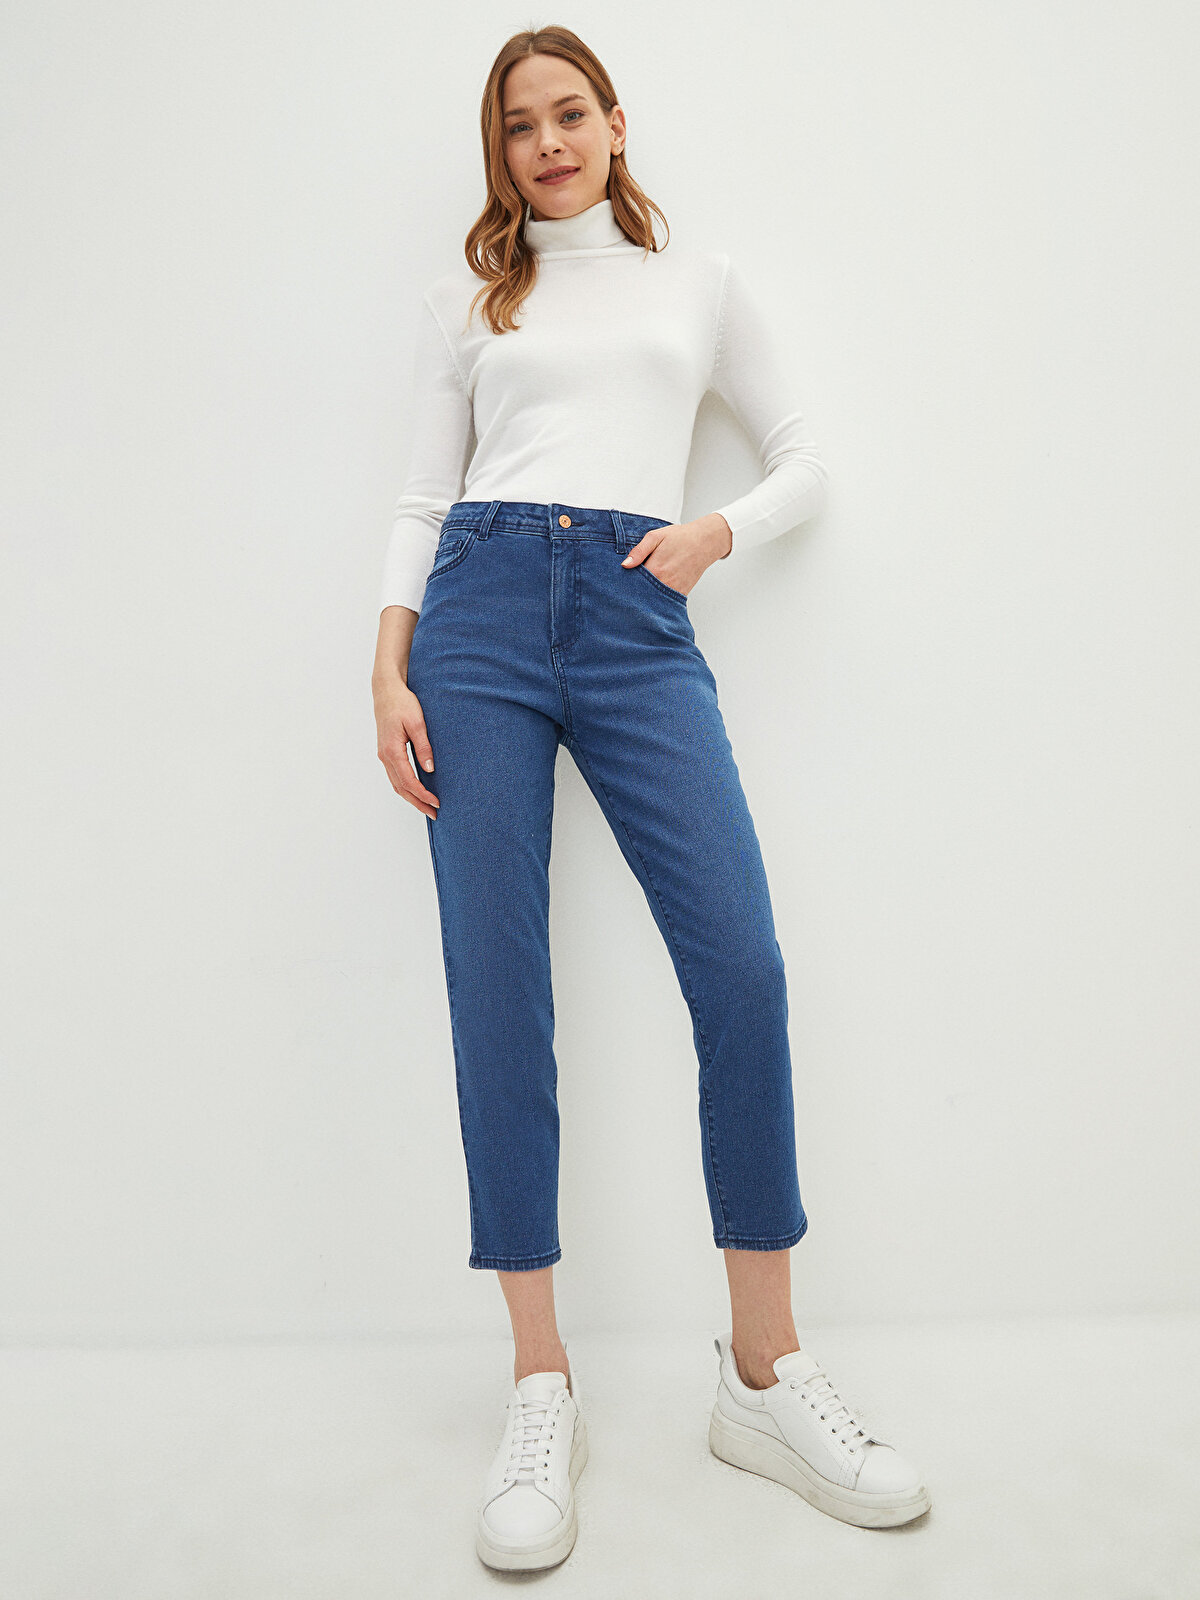 LCW BASIC Skinny Fit Women's Rodeo Jeans with Pocket Detail 